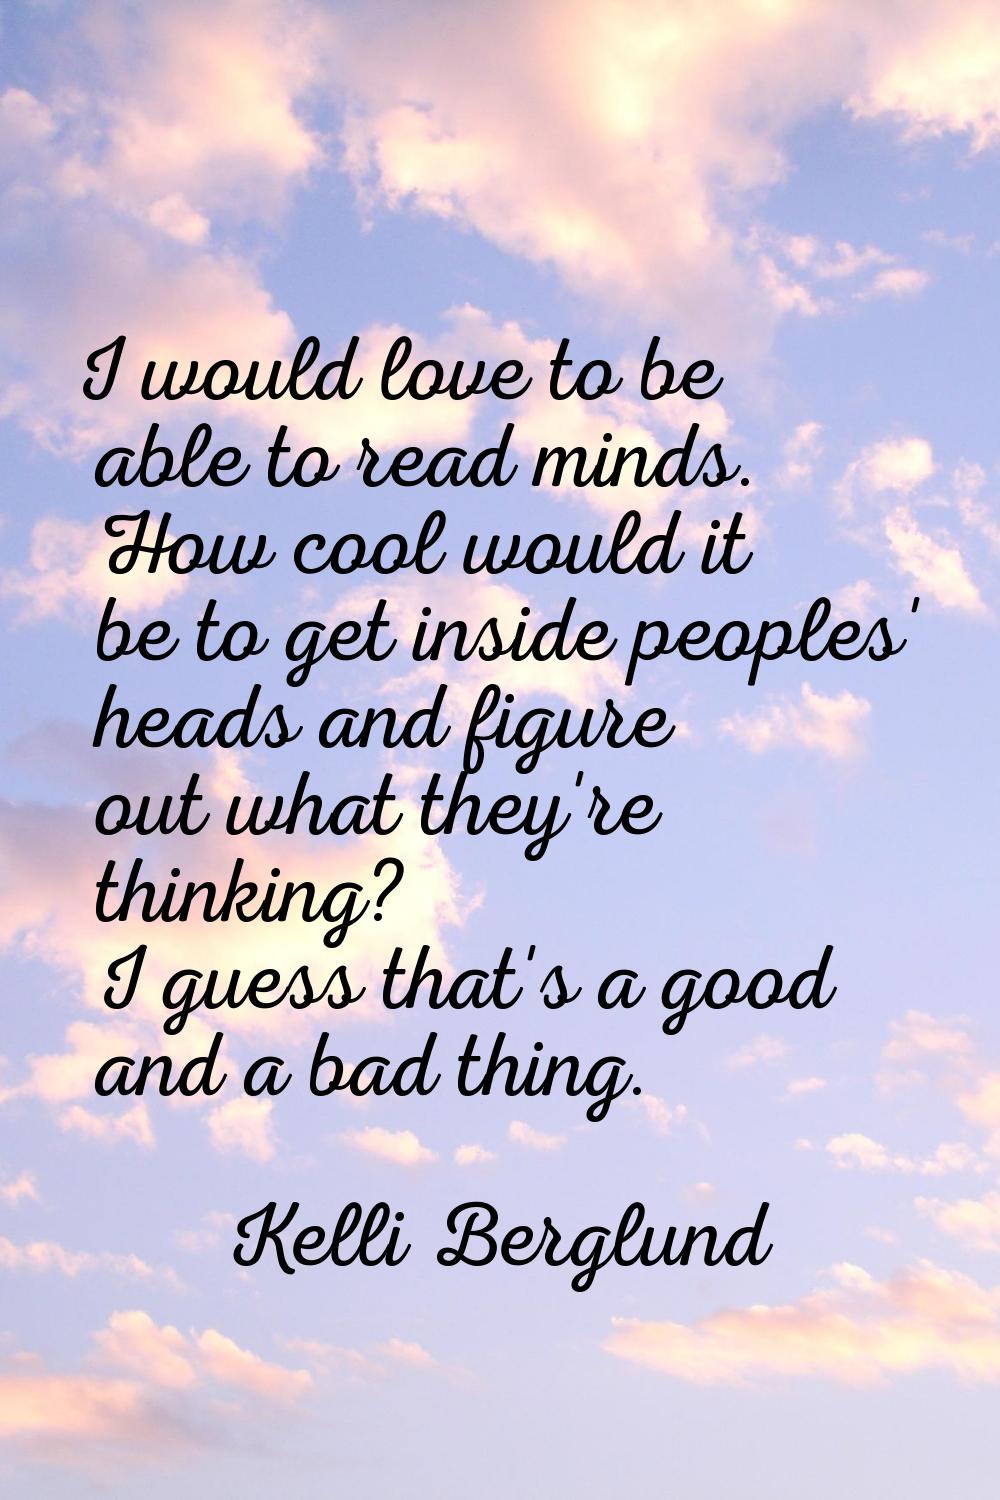 I would love to be able to read minds. How cool would it be to get inside peoples' heads and figure